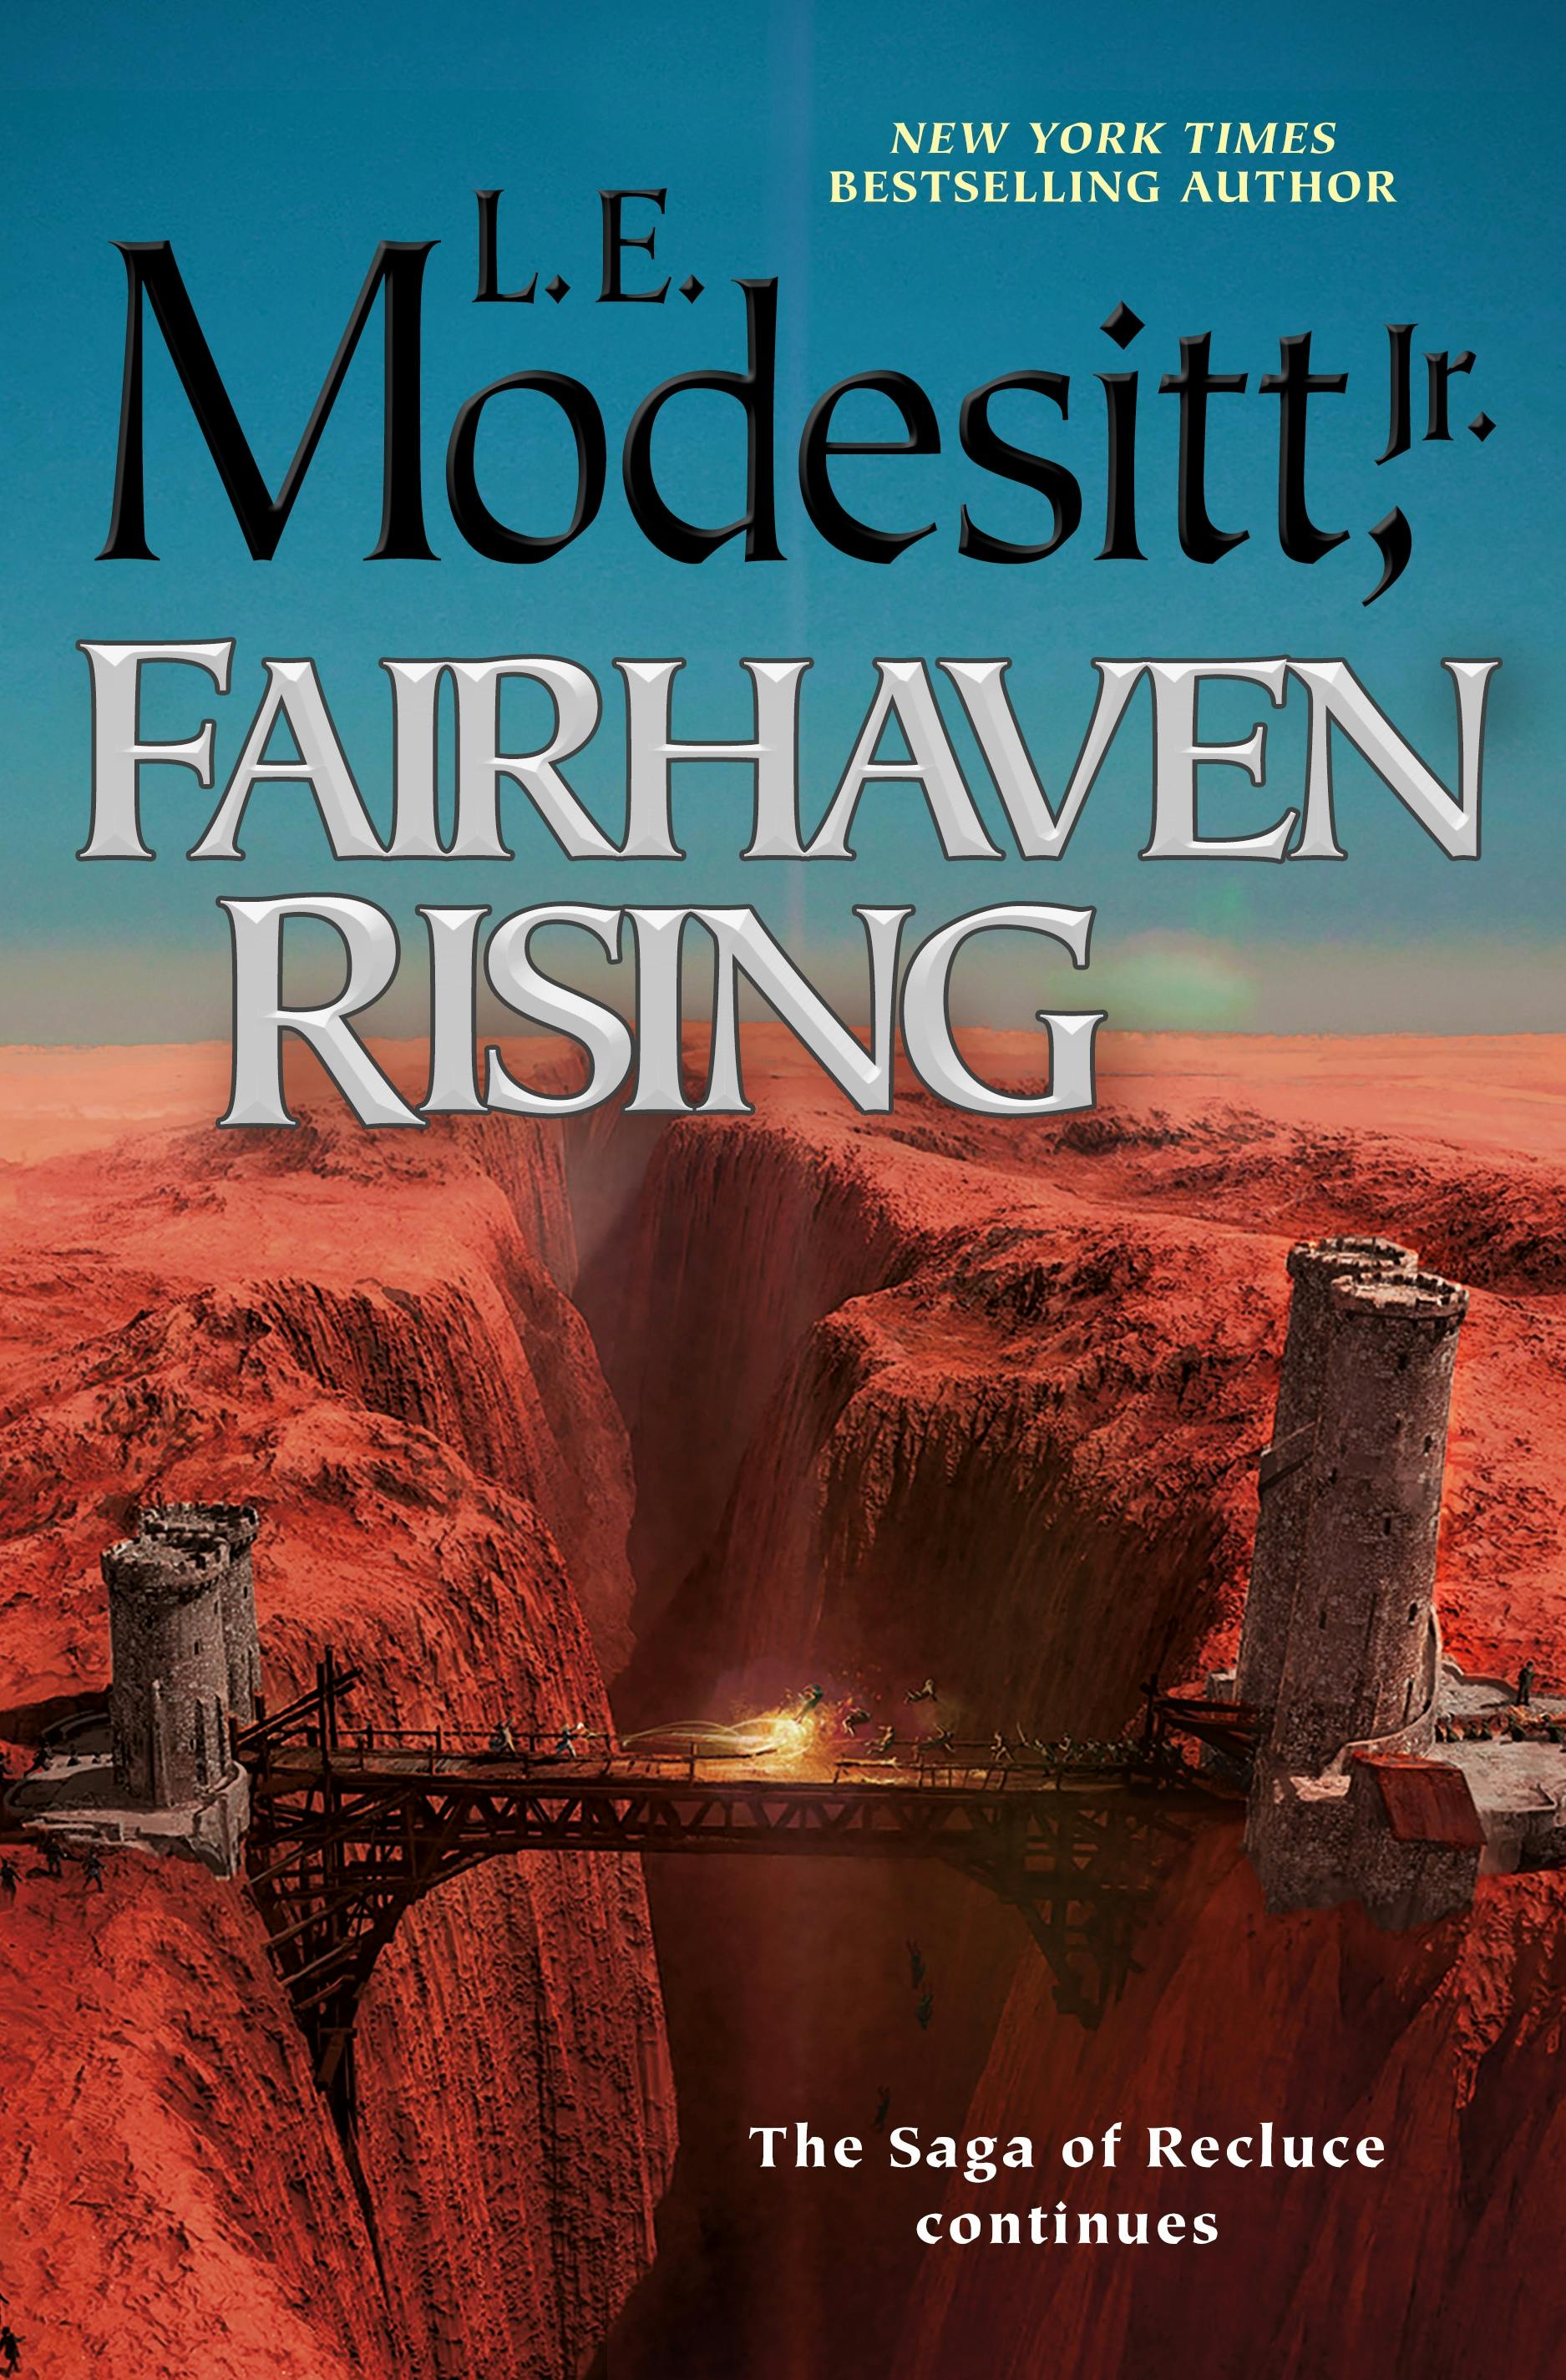 Cover for the book titled as: Fairhaven Rising